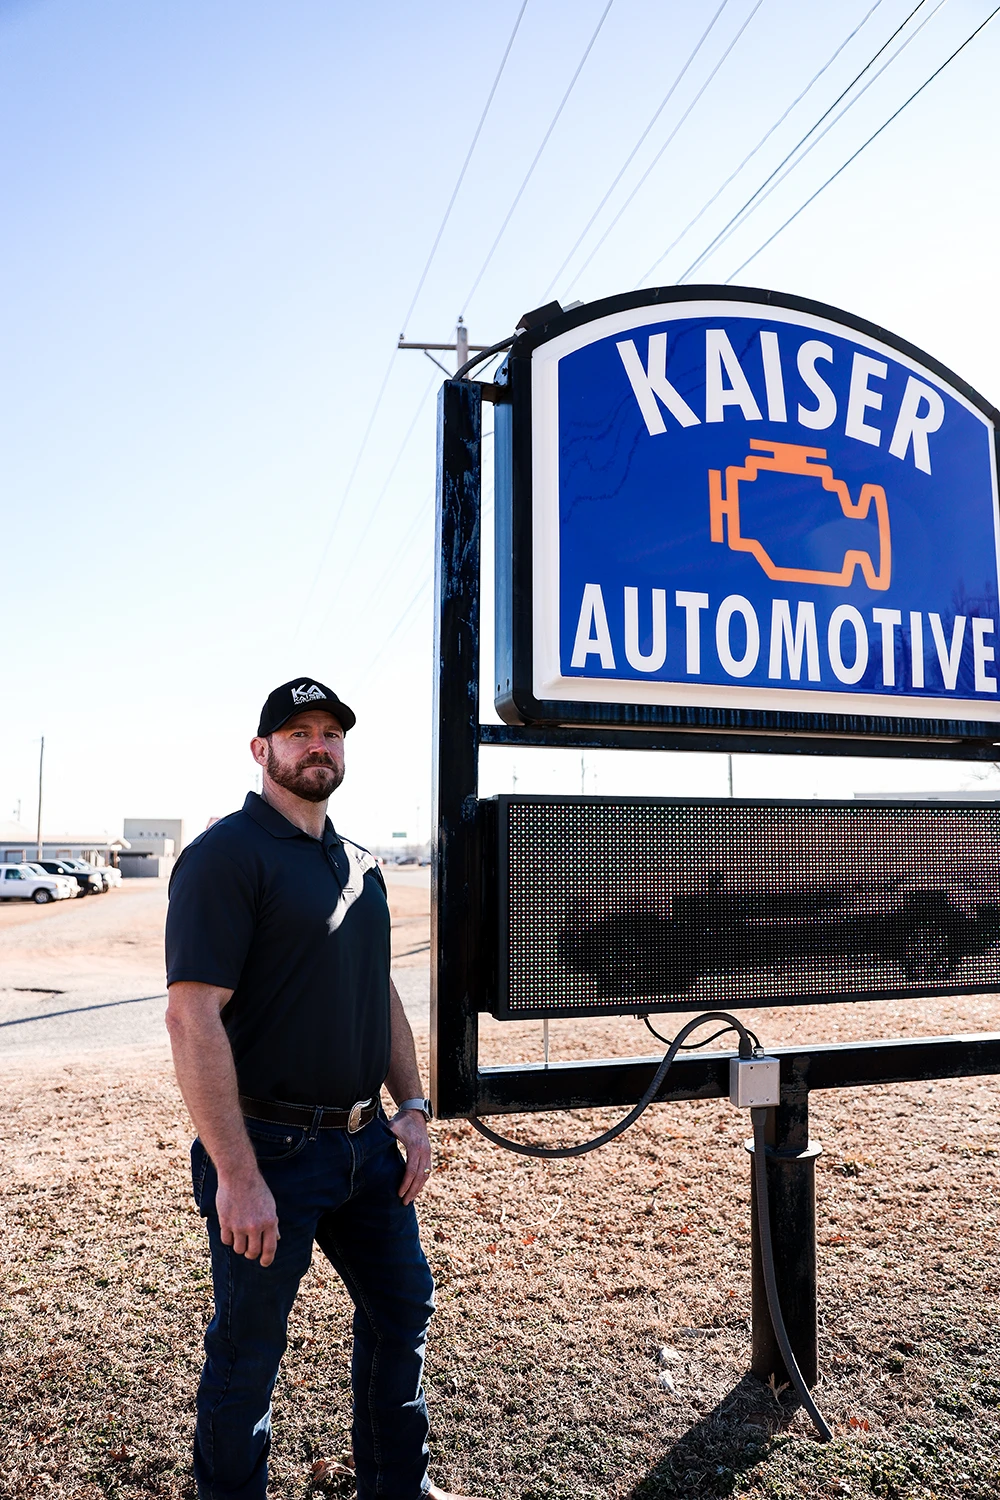 Owner and Outside sign for Kaiser Automotive